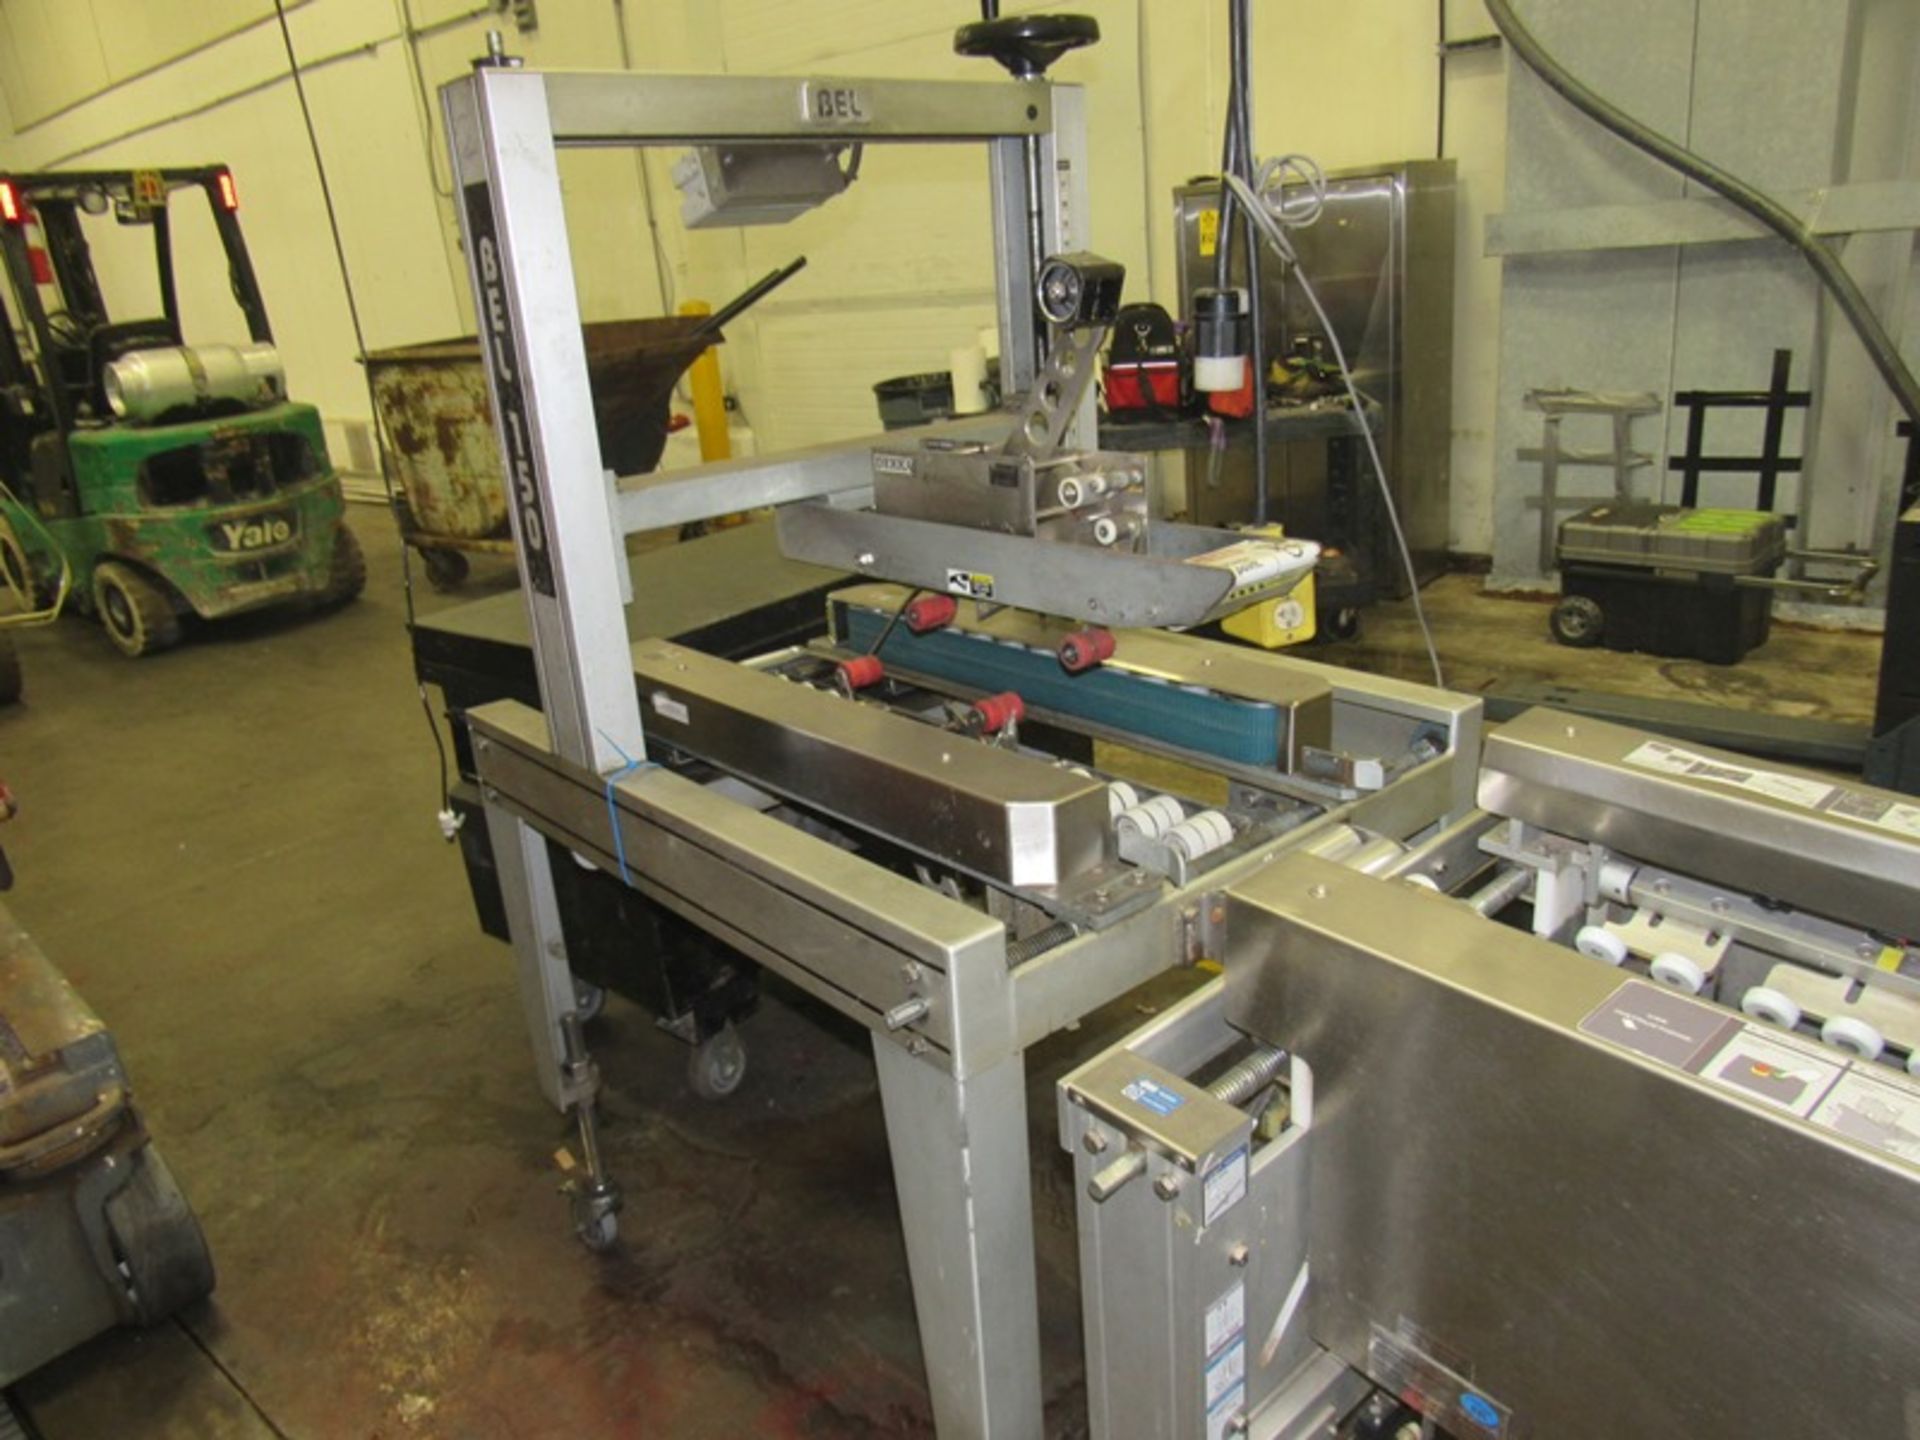 Belcor Mdl. 505 Semi Automatic Case Erector with Belcor Mdl. 150 Case Taper with top and bottom tape - Image 6 of 7